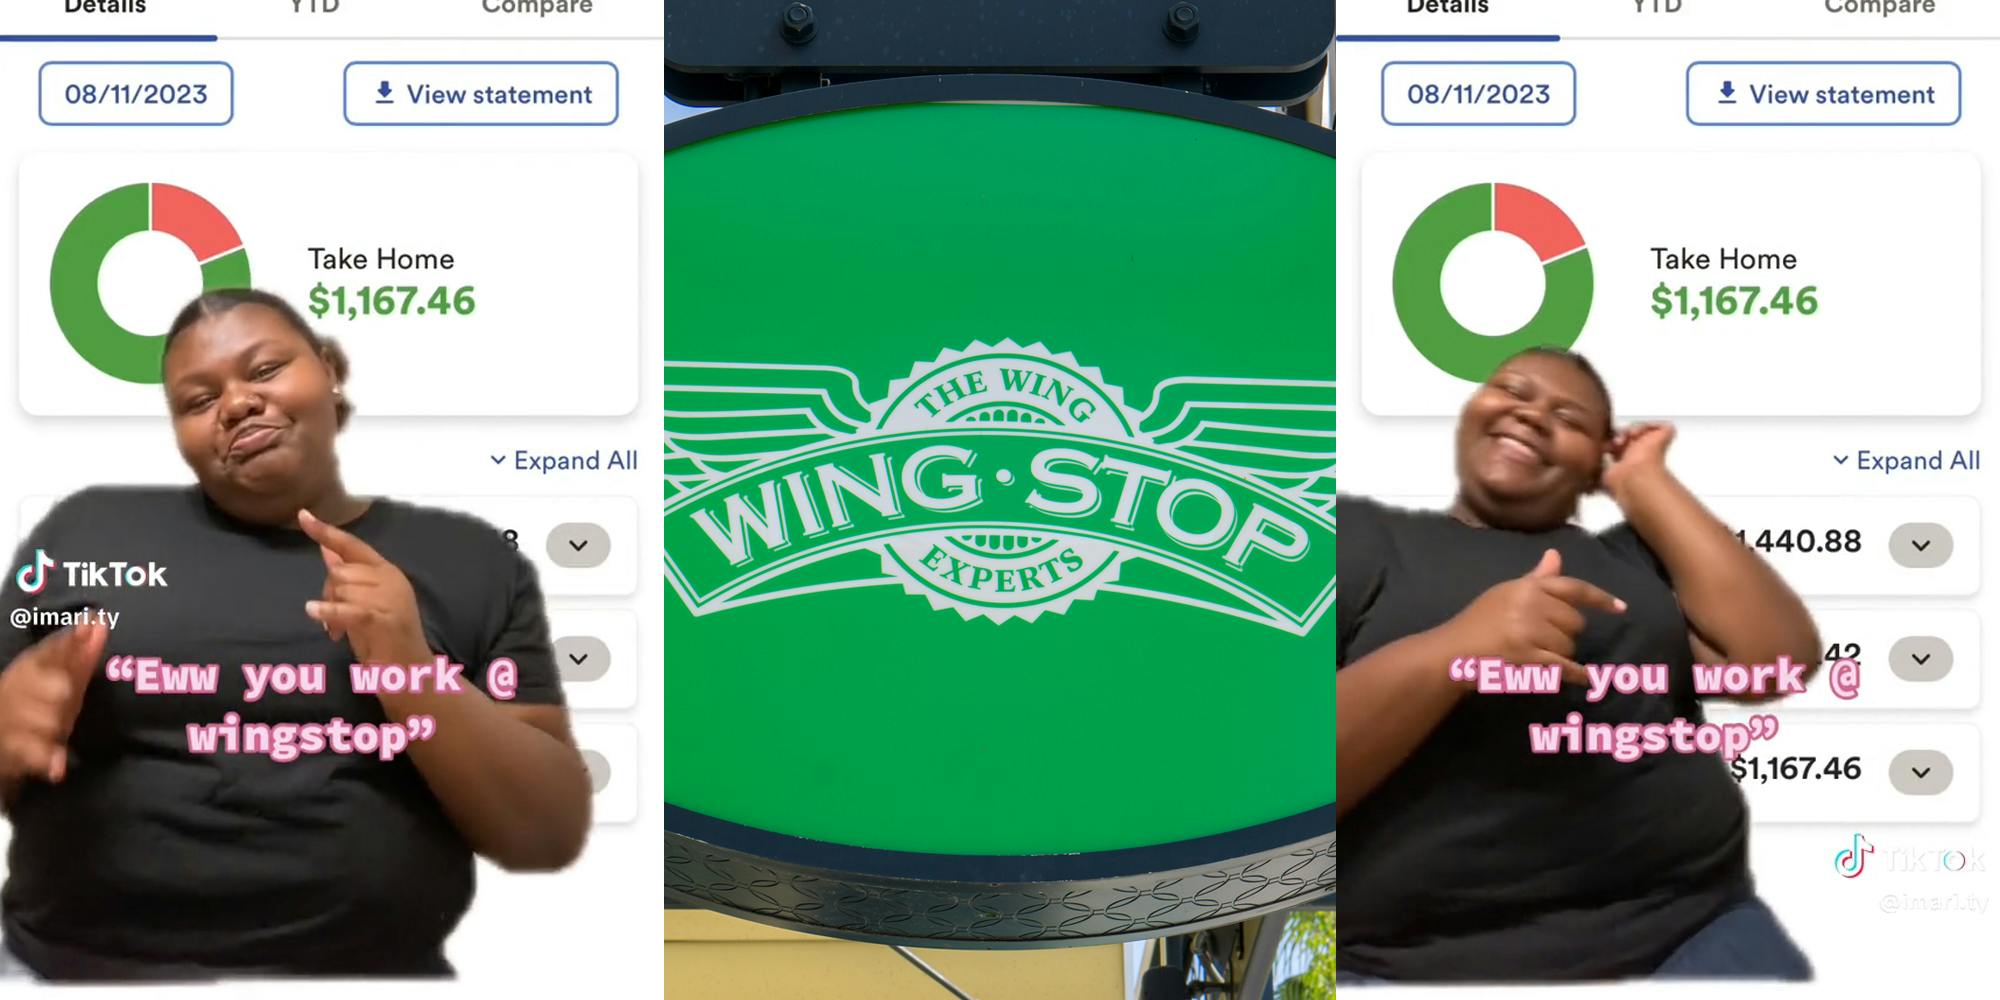 young woman with paystub in background with caption "eww you work @ wingstop" (l&r) wing stop sign (c)